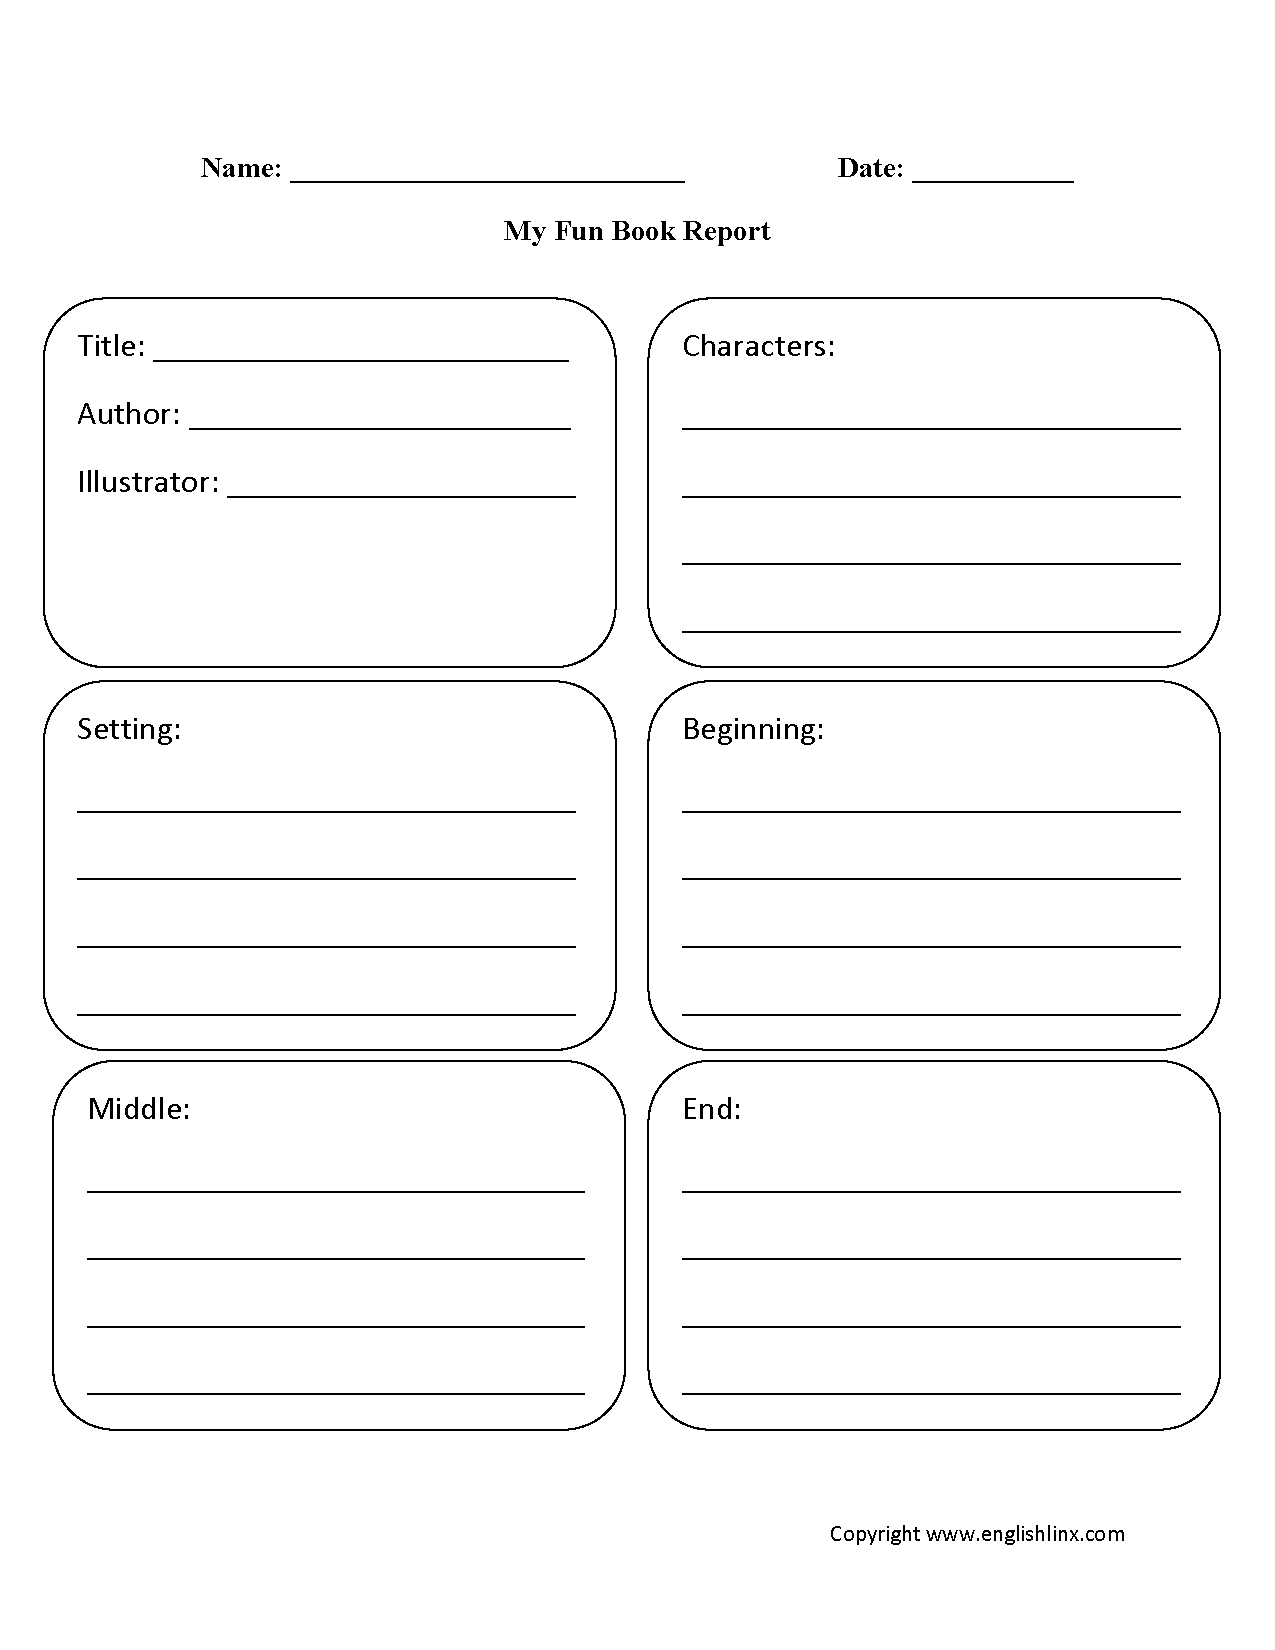 011 Biography Book Report Template Ideas My Formidable For Intended For Book Report Template 2Nd Grade